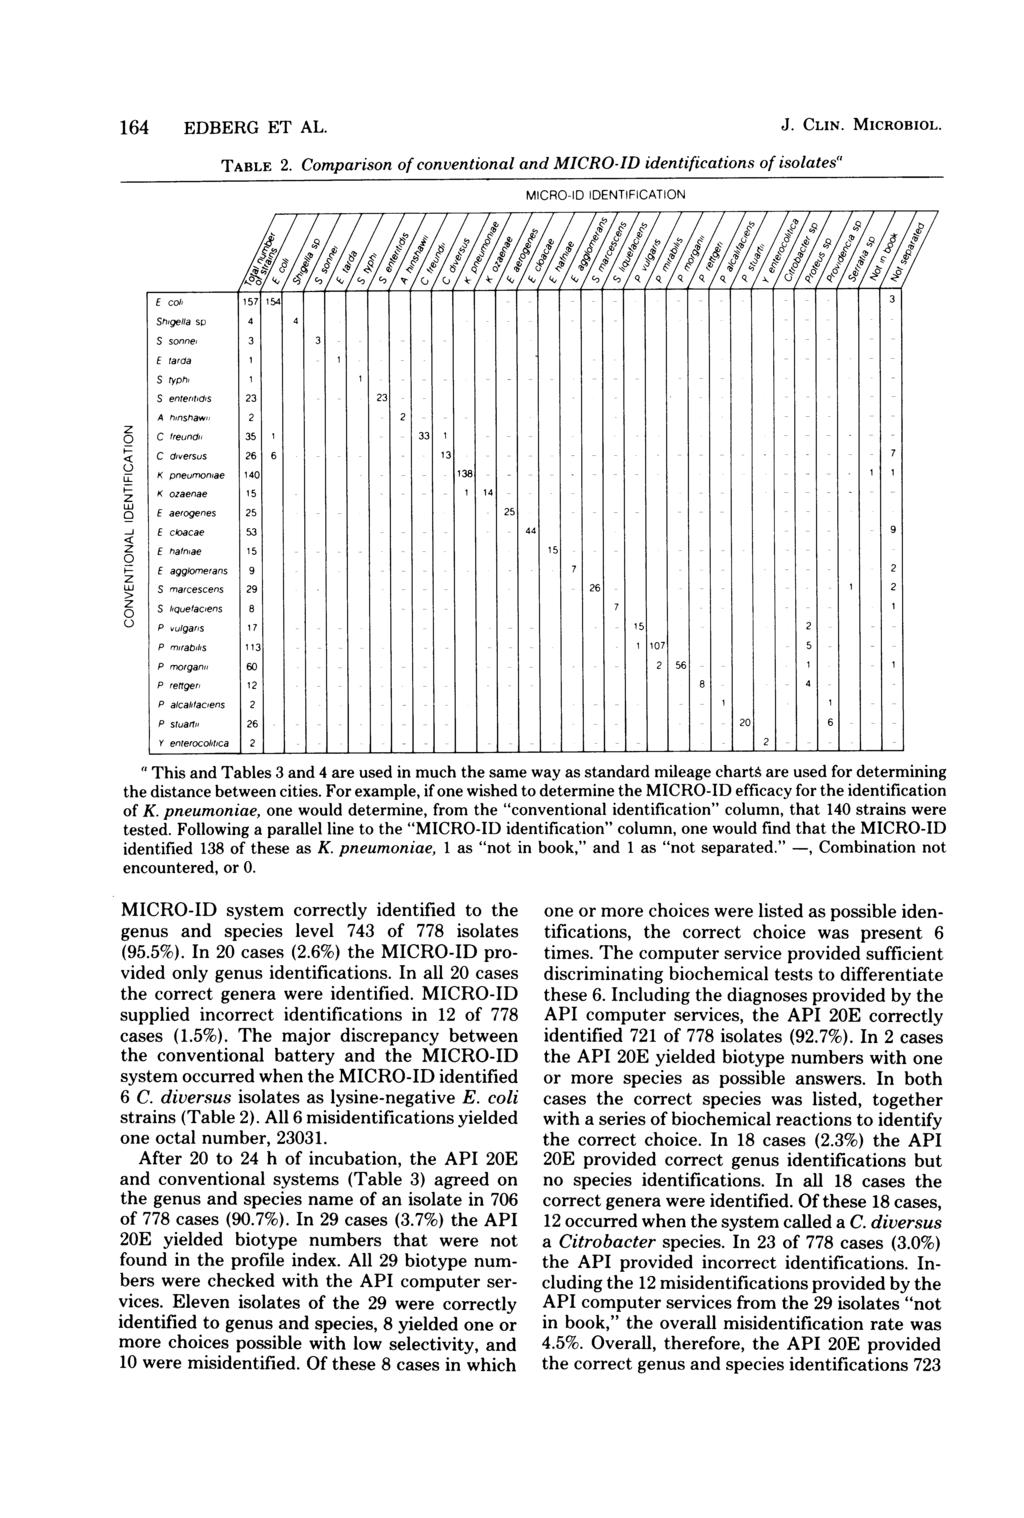 164 EDBERG ET AL. J. CLIN. MICROBIOL. TABLE 2. Comparison of conventional and MICRO-ID identifications of isolates"' MICRO-ID IDENTIFICATION --I C) (L C> Ecol' 157 15.